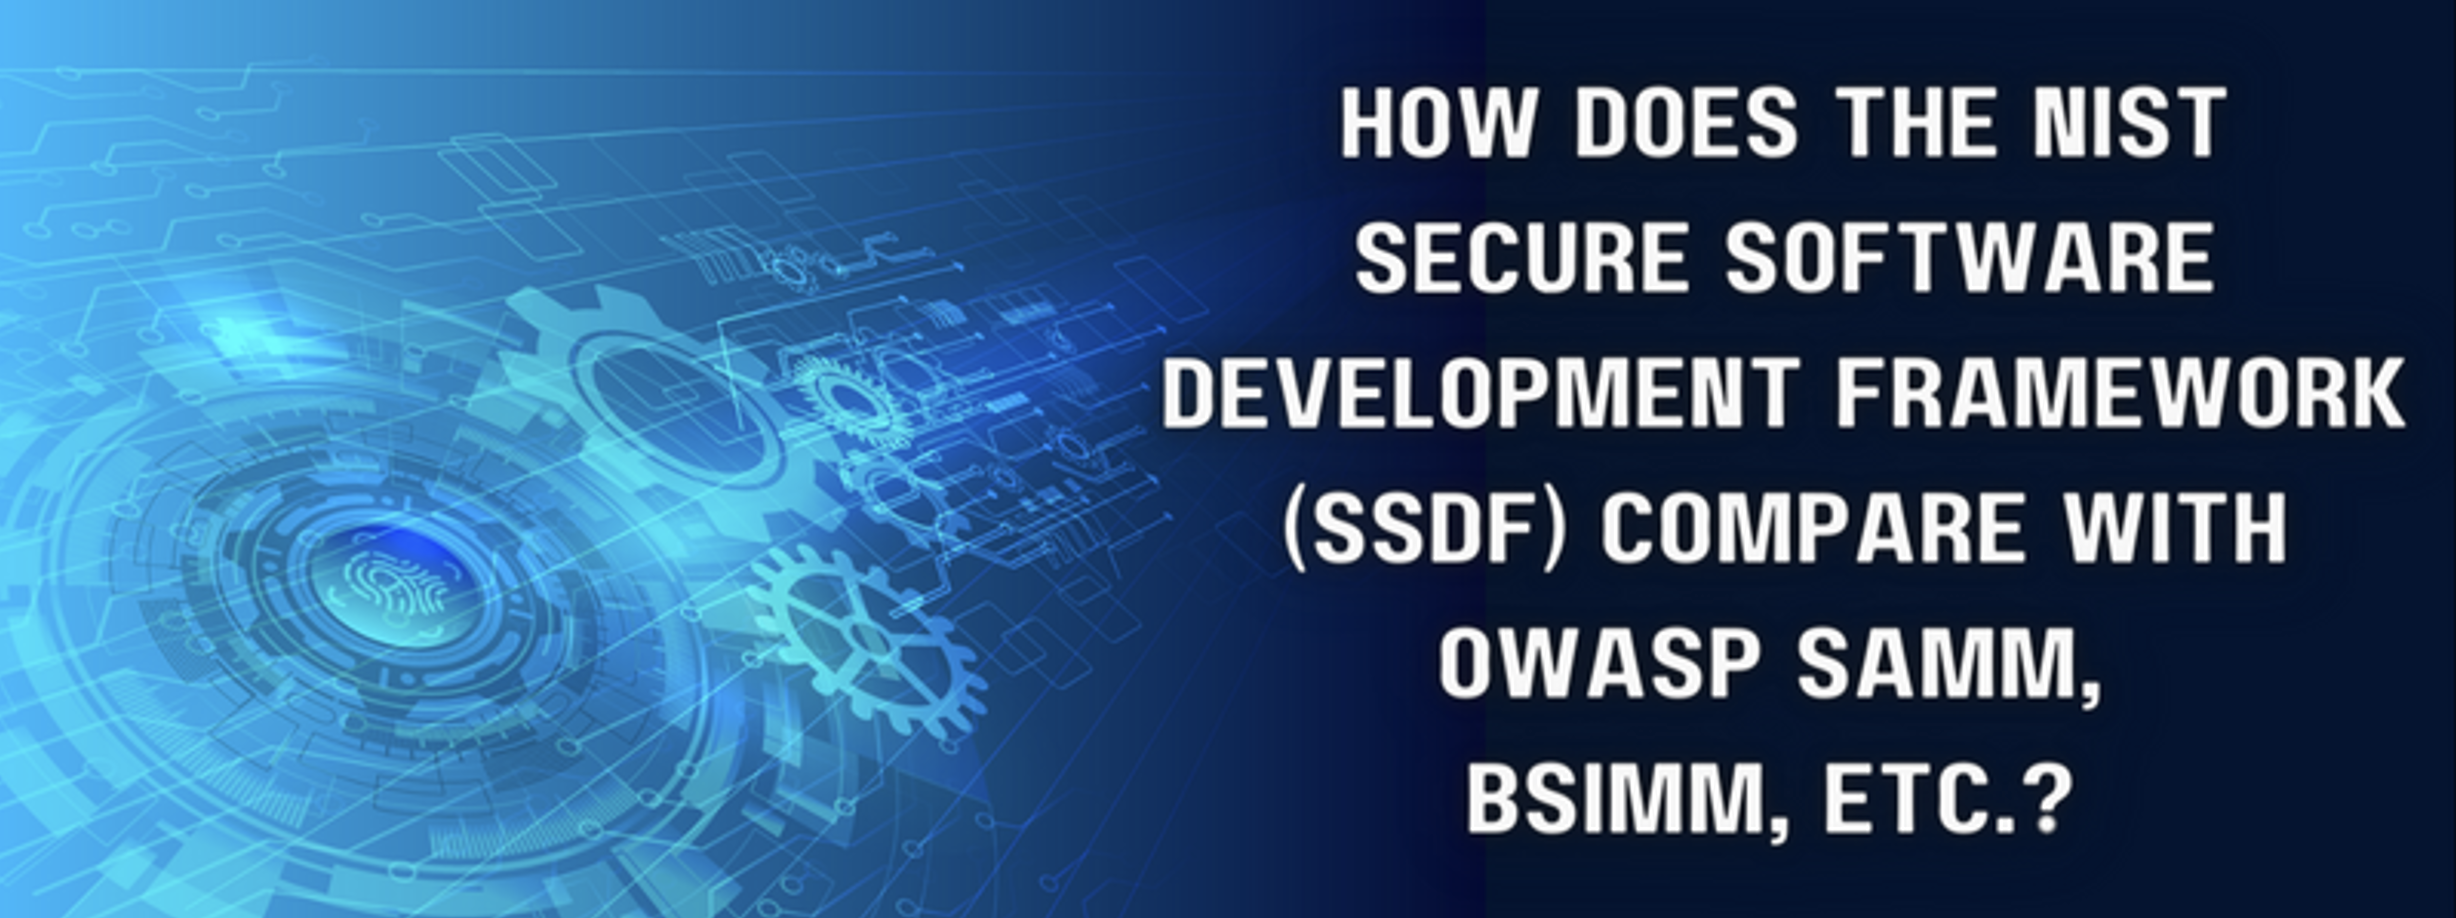 How Does the NIST Secure Software Development Framework (SSDF) Compare with OWASP SAMM, BSIMM, etc.?